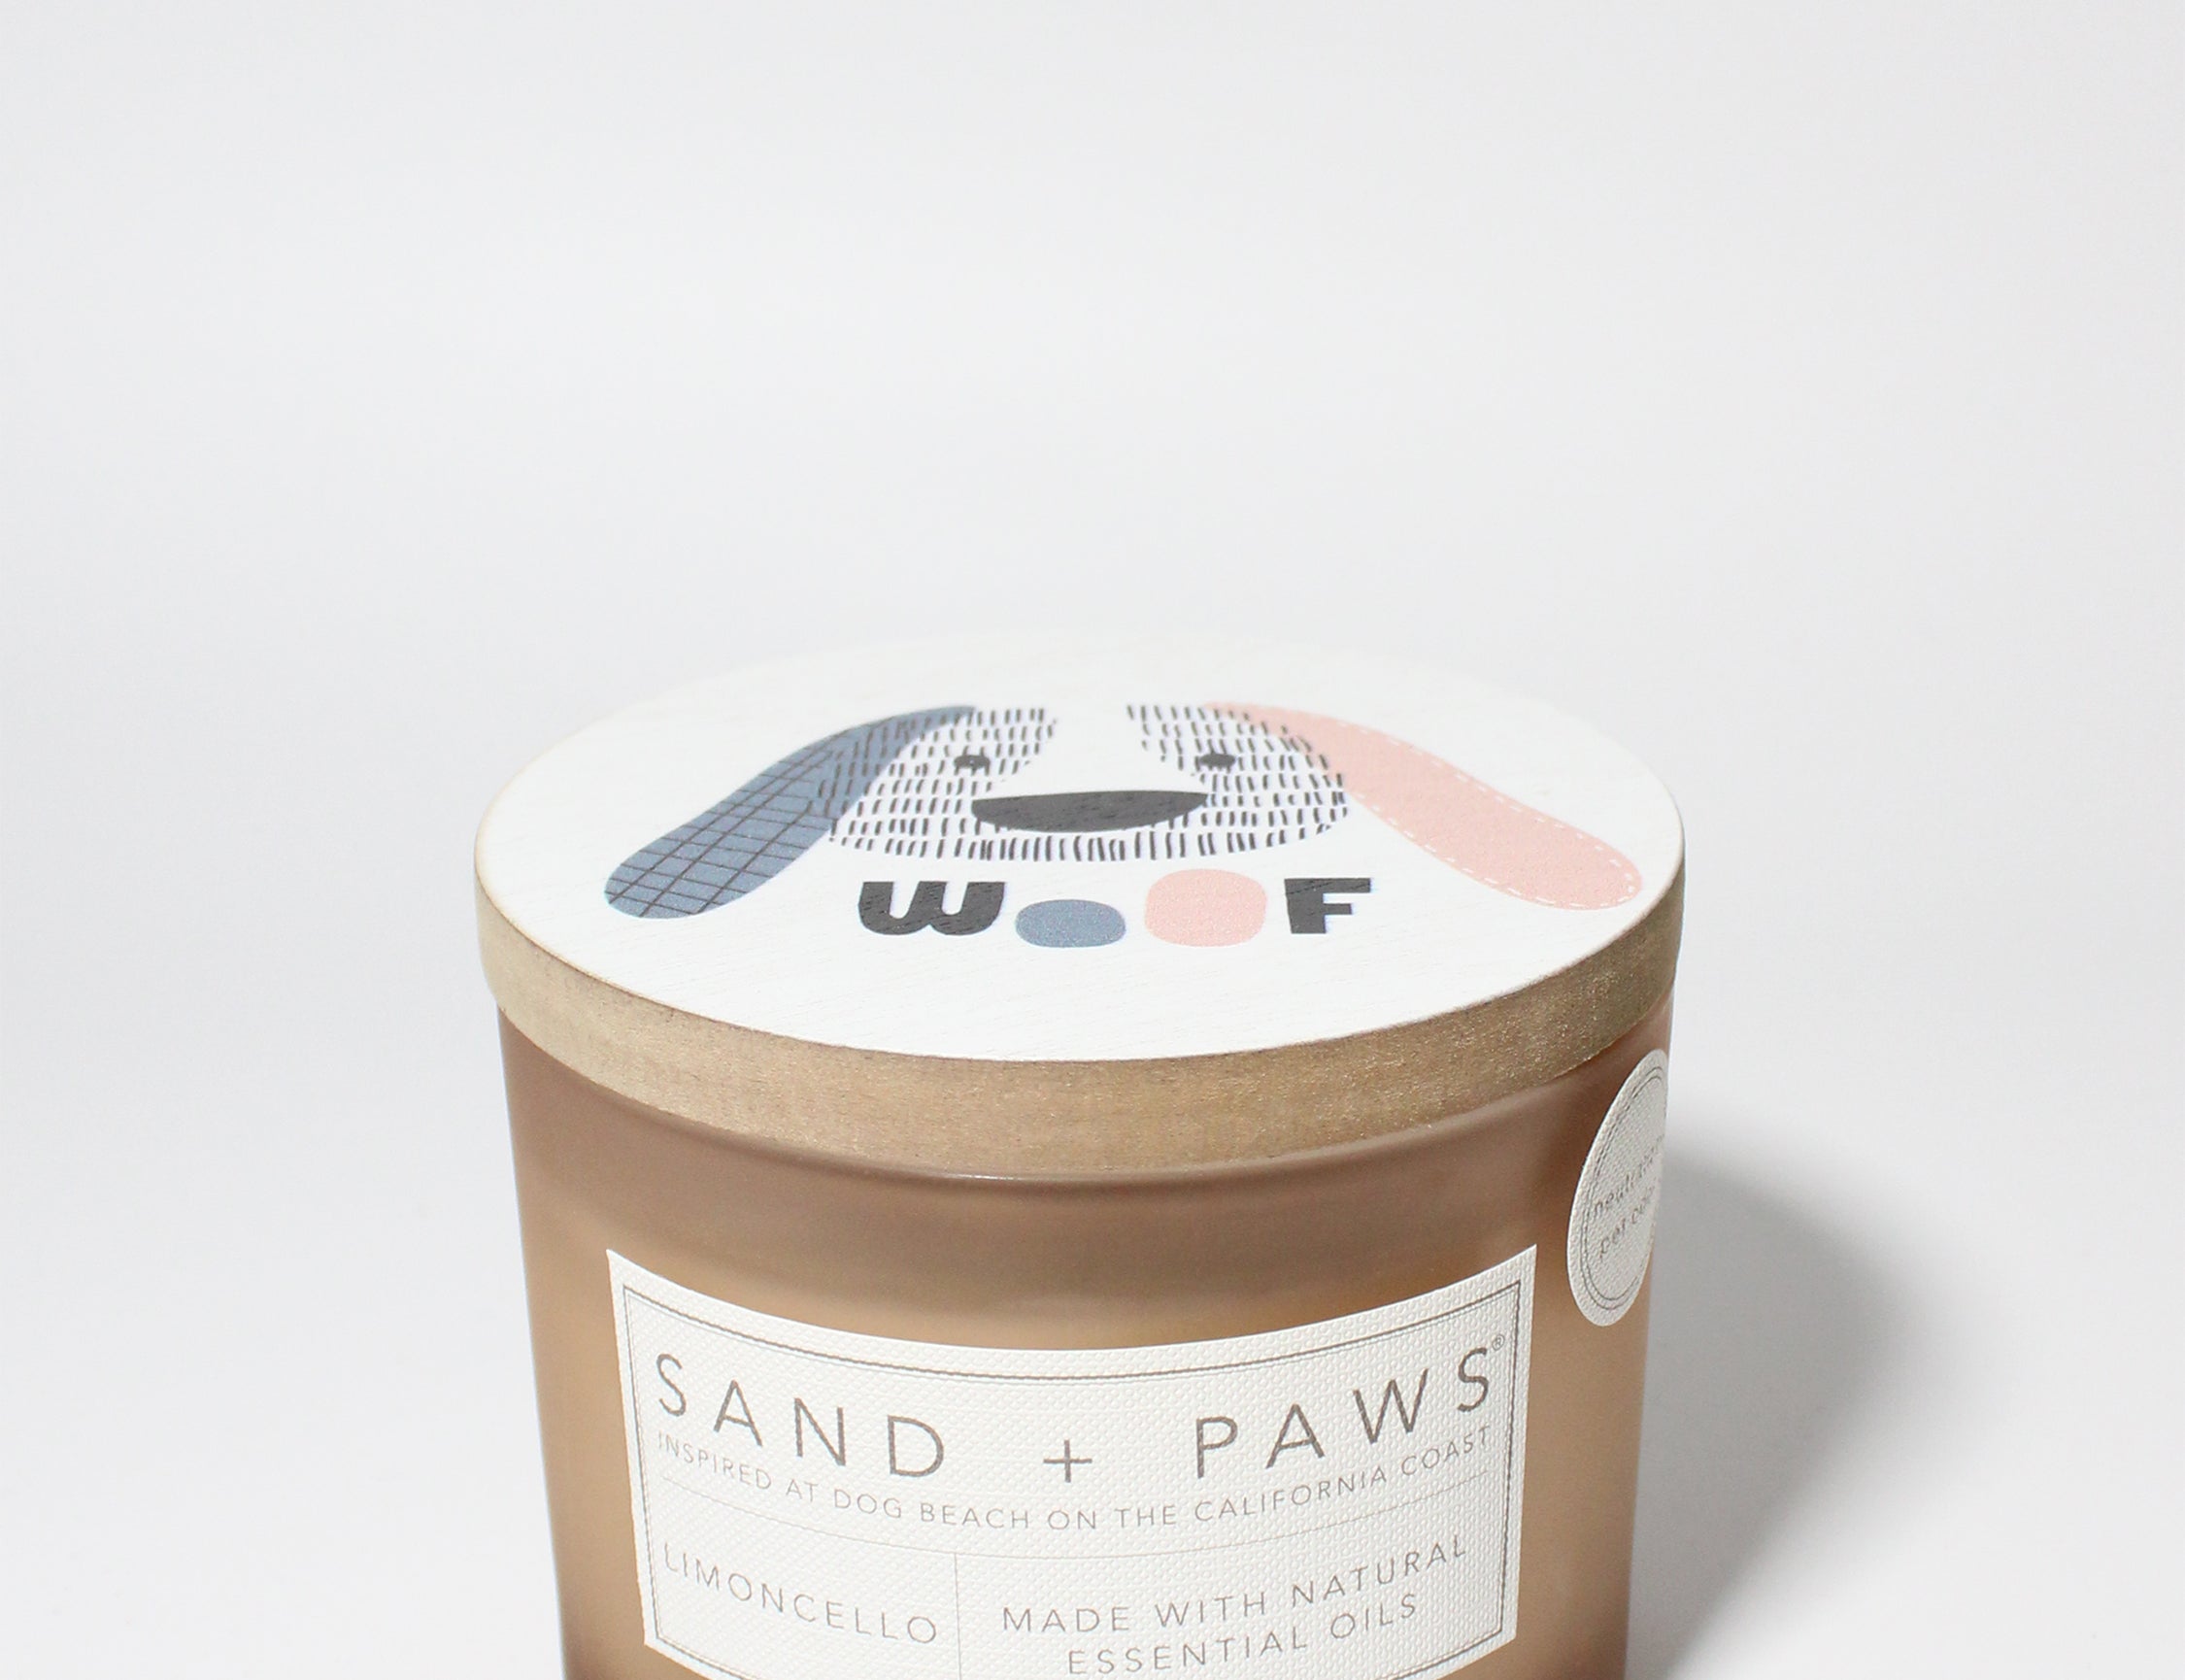 Sand + Paws Limoncello 12 oz scented candle Soft Pink vessel with WOOF dog face lid